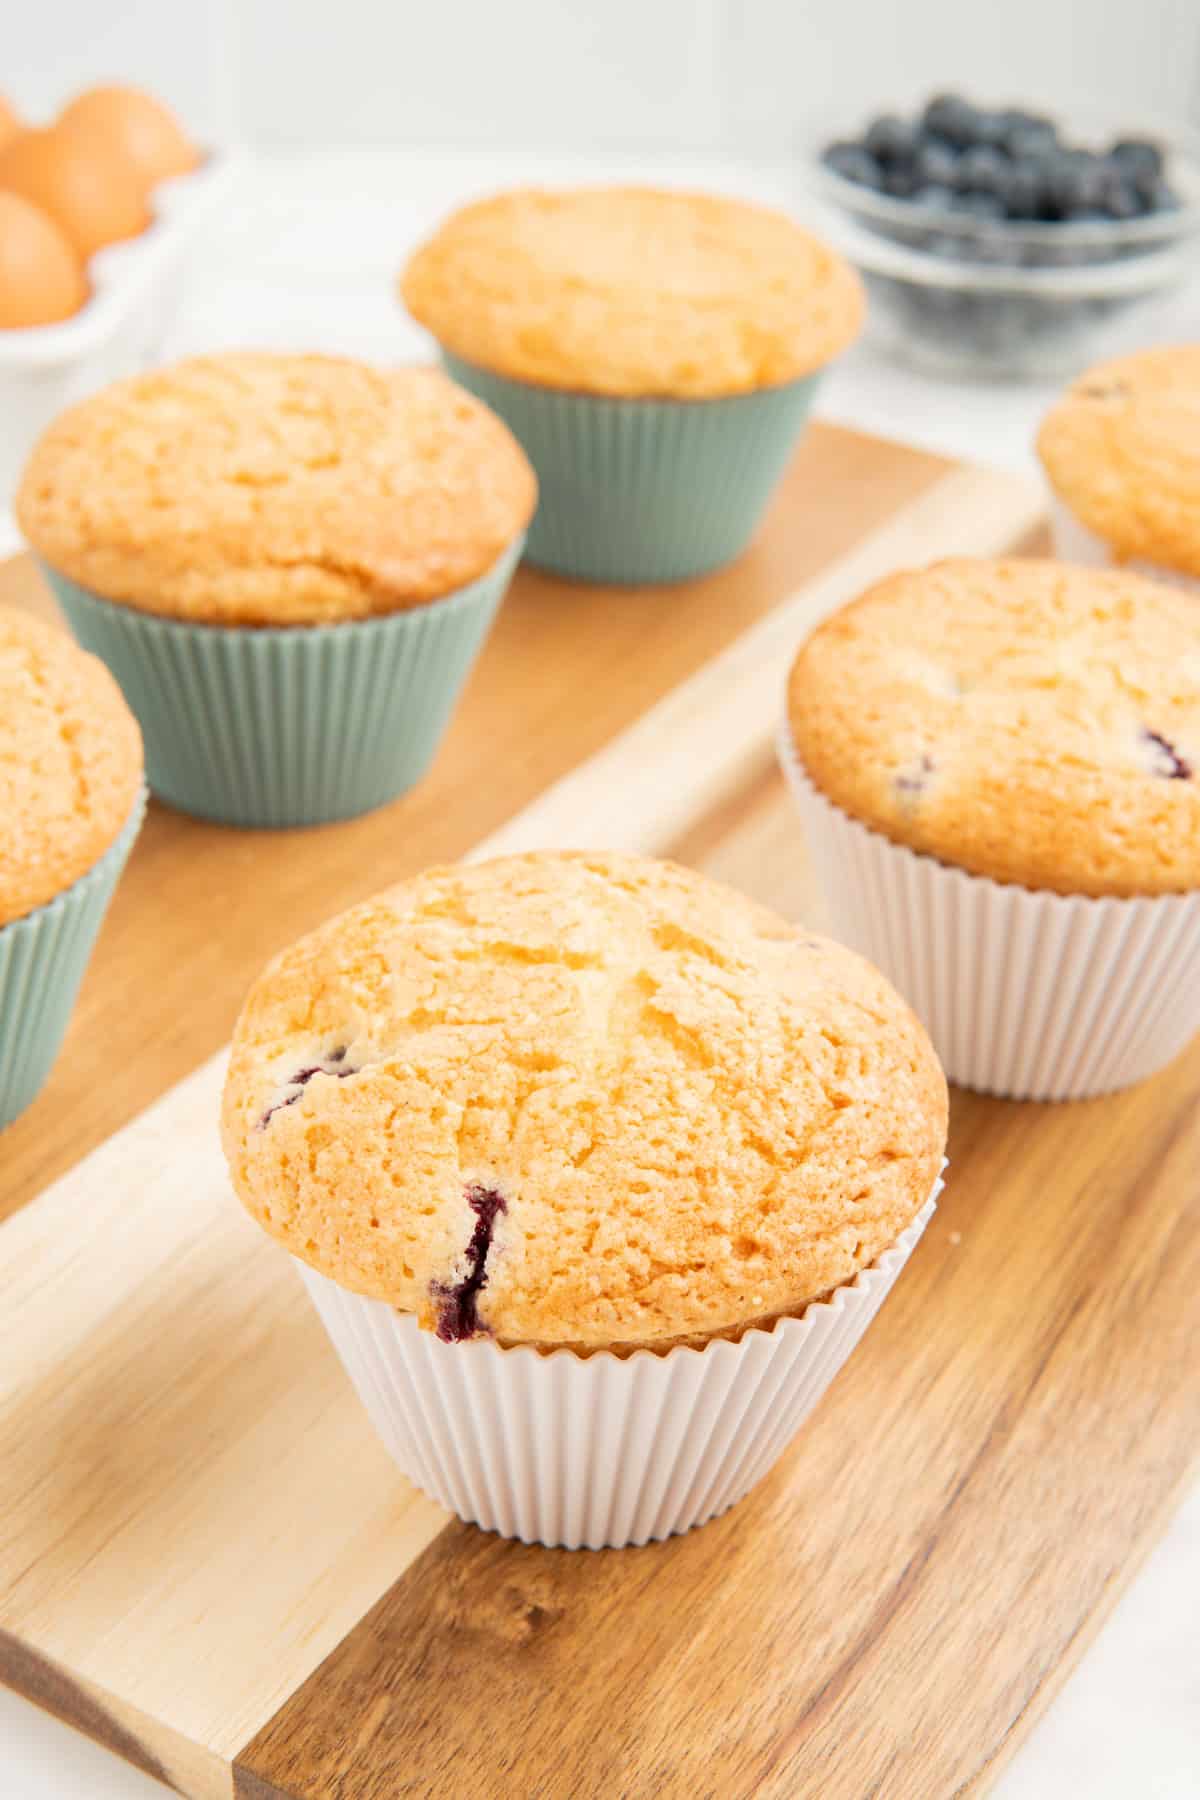 Jumbo blueberry muffins on a wooden board.